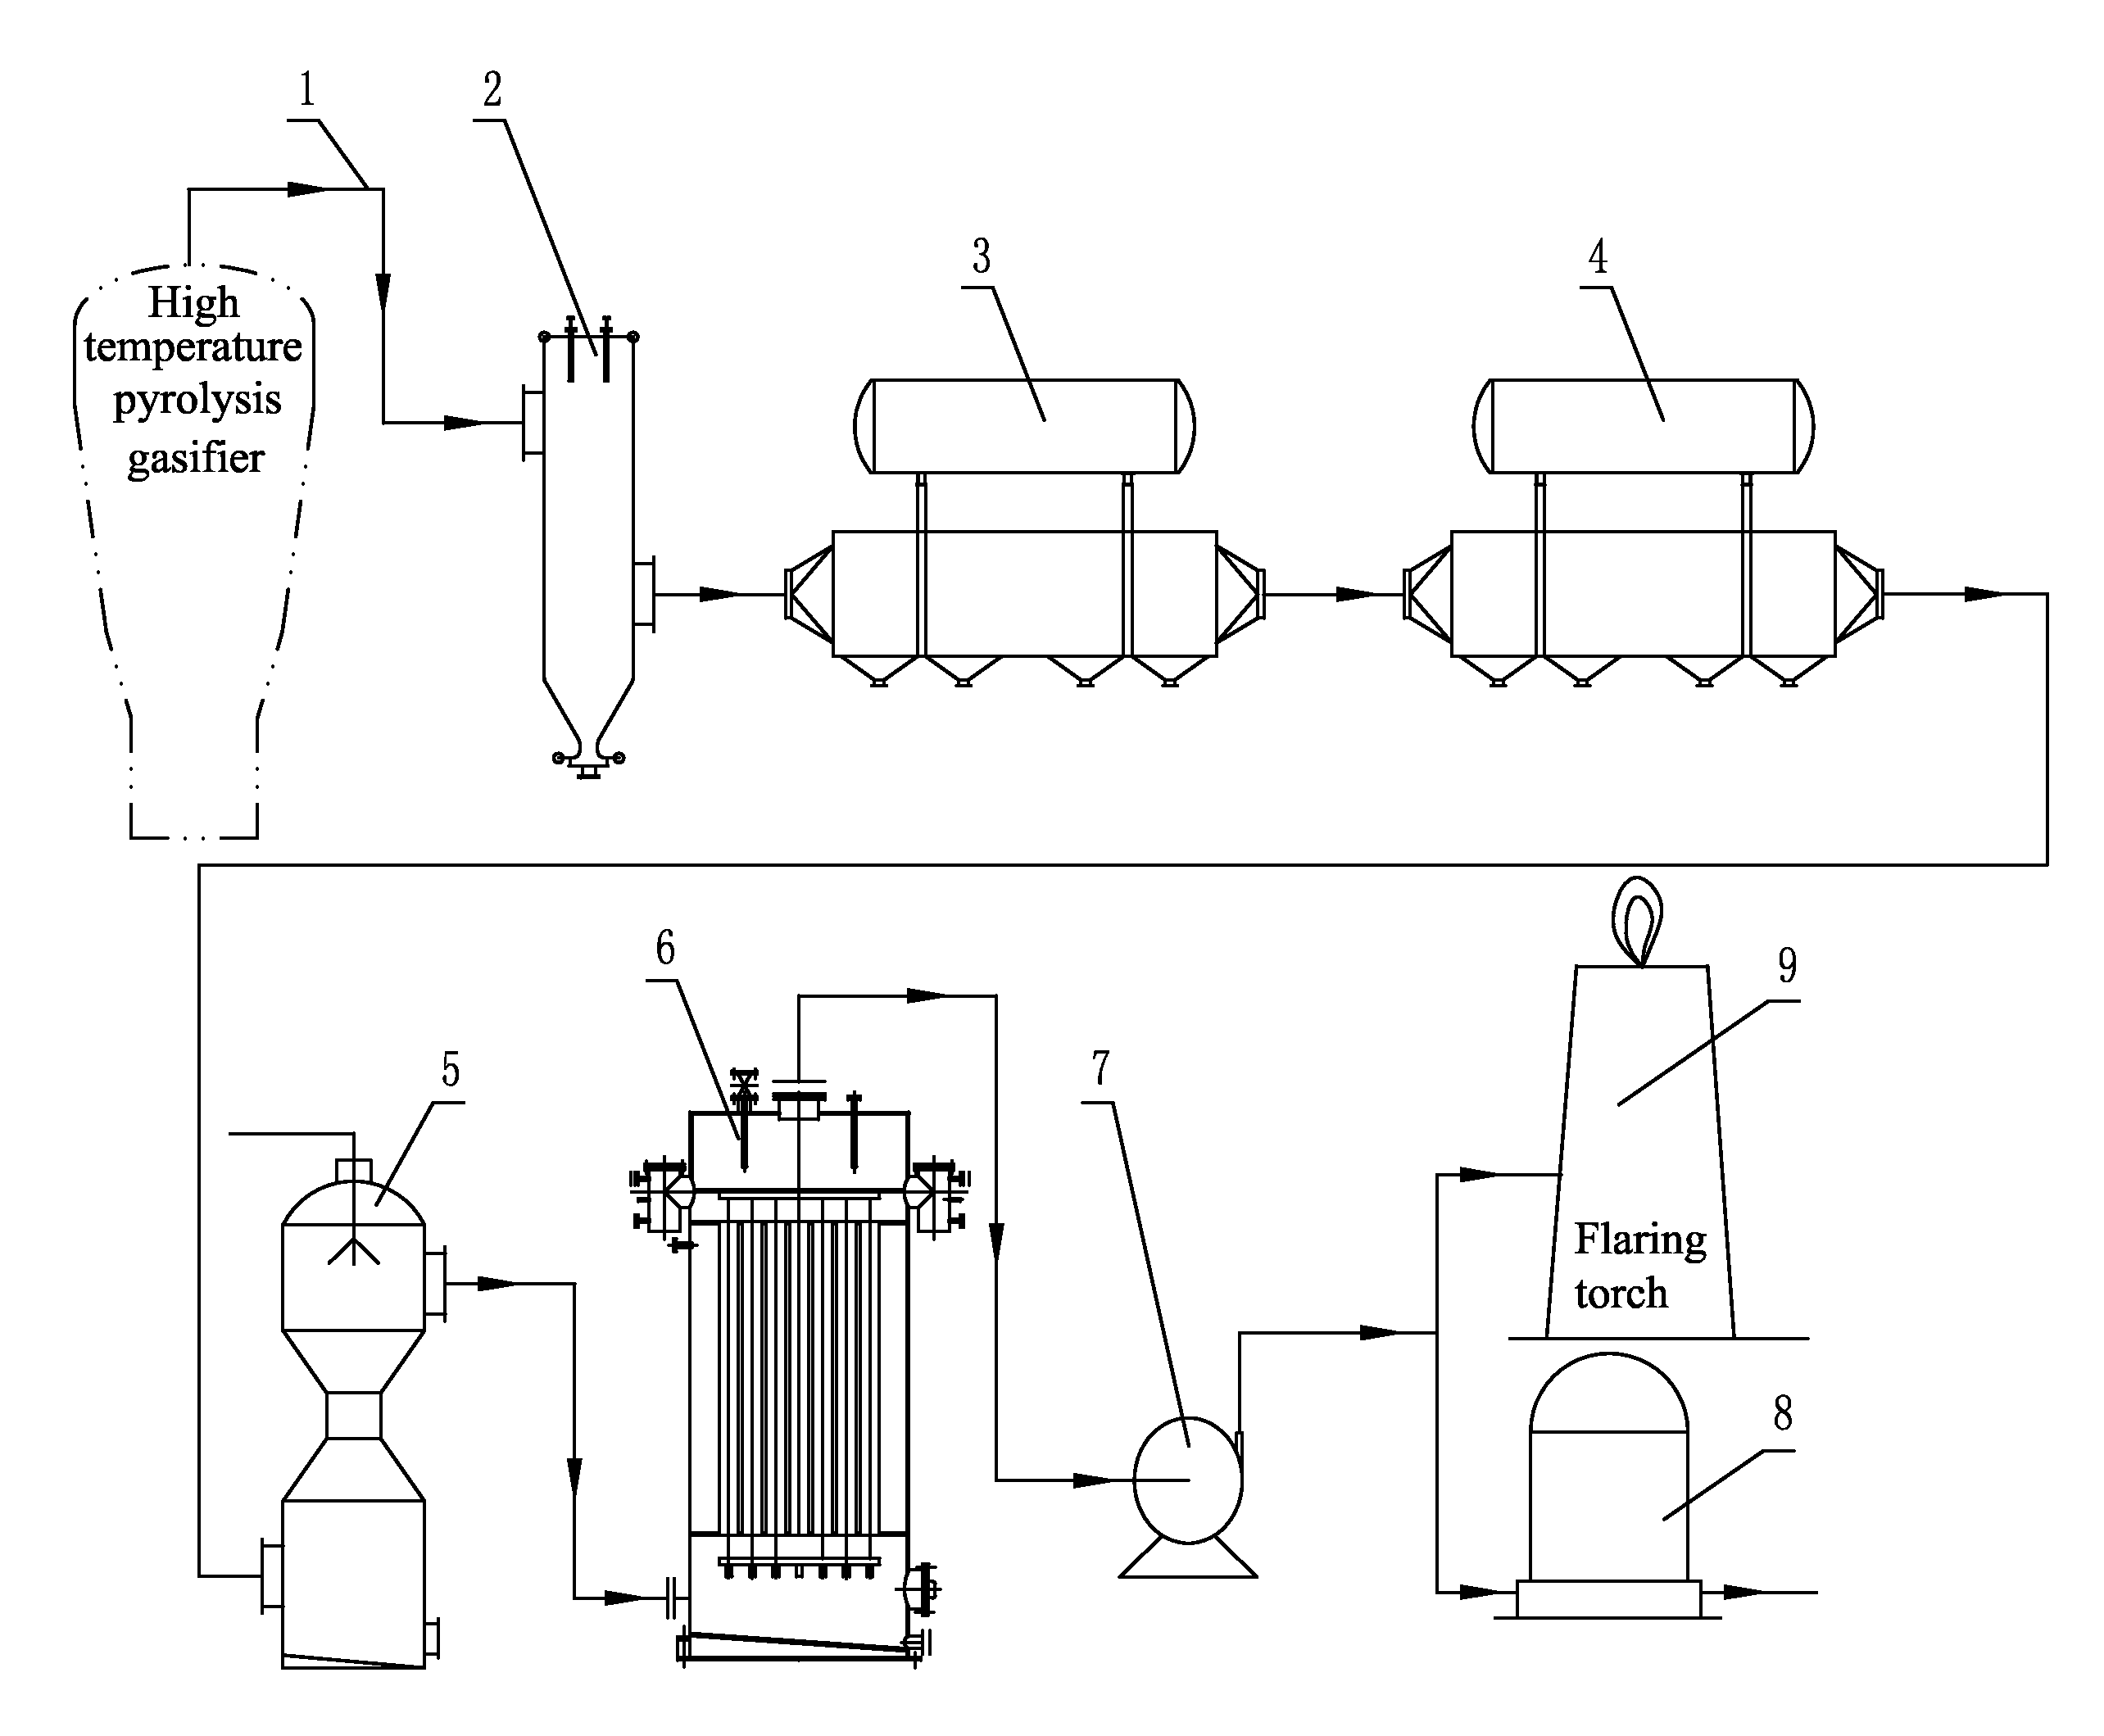 Method of purification of biomass syngas under negative pressure